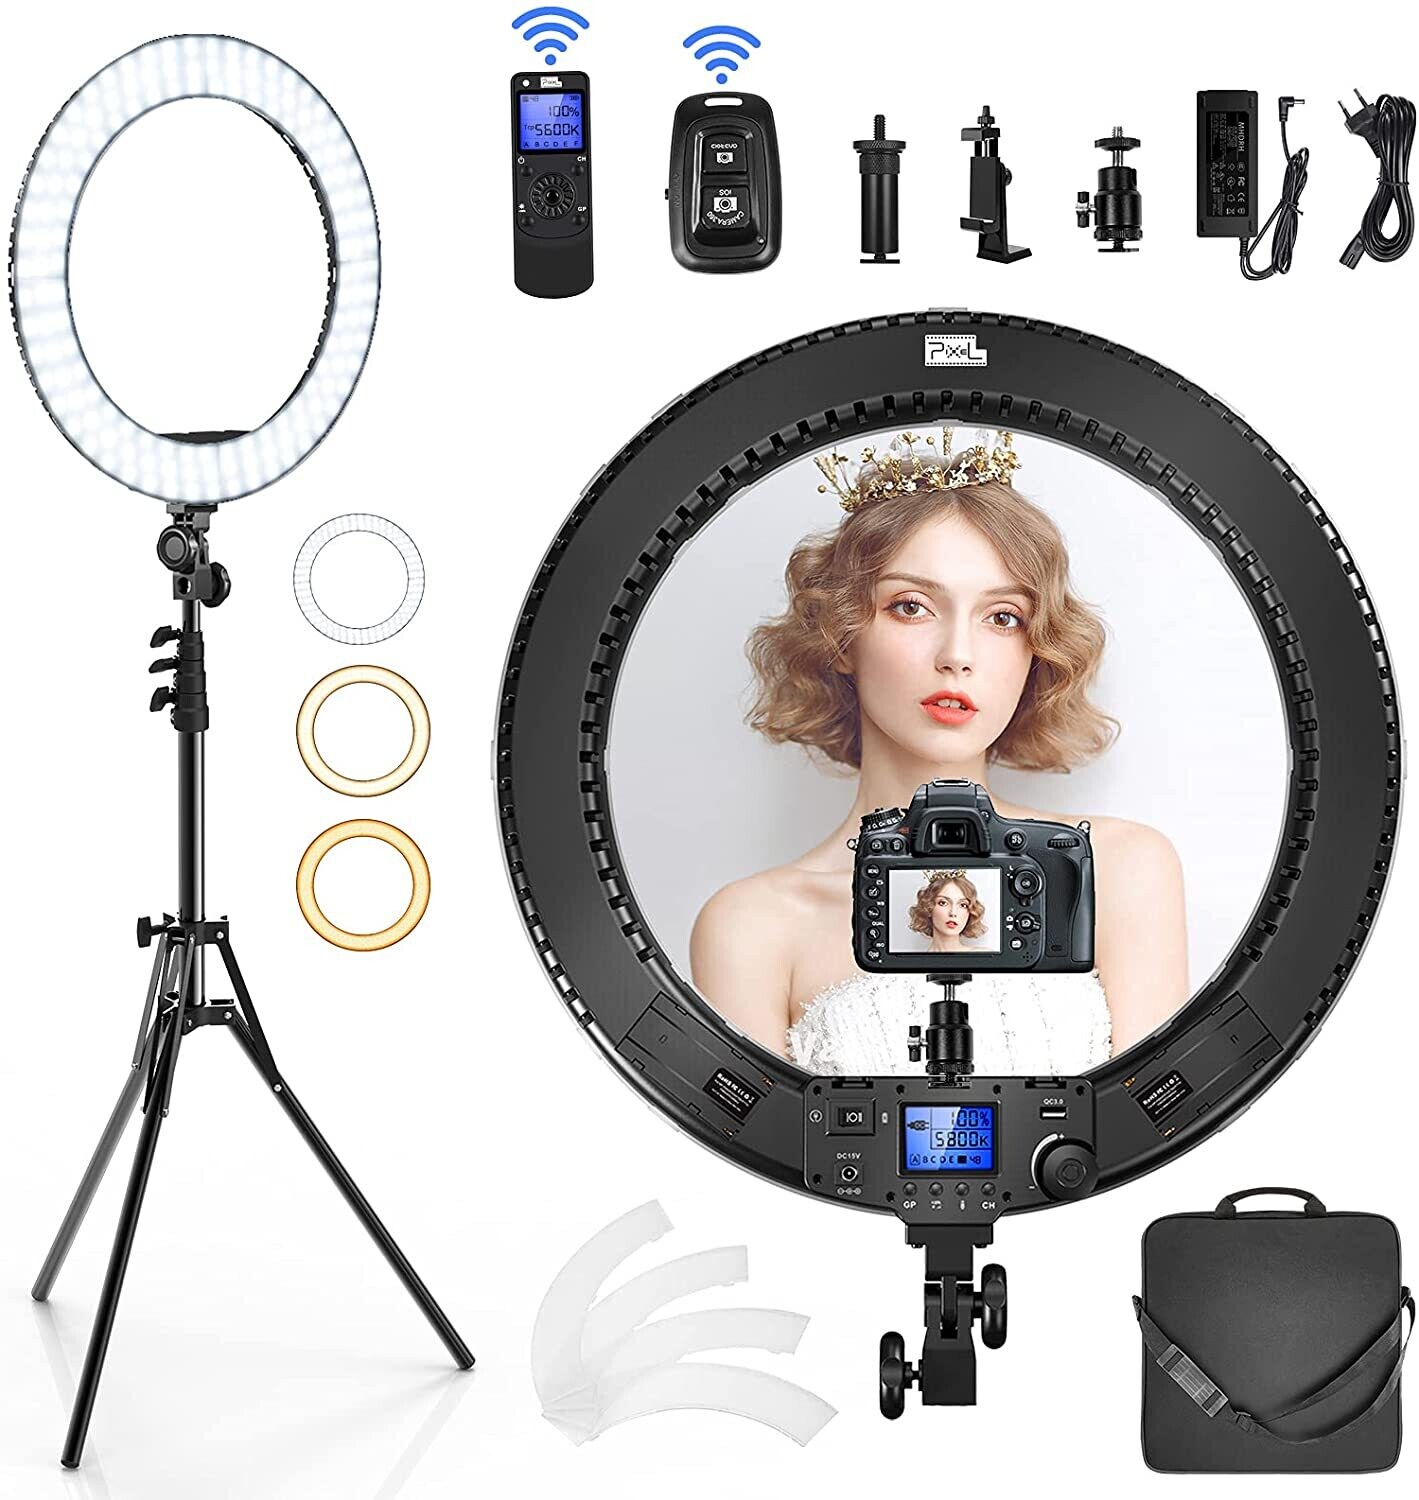 PIXEL 19 inch Ring Light Kit, 60W LED Ring Light with LCD Screen, Support 2.4G Remote and Multiple Lights Control, CRI>97, 3000K-5800K, Tripod Included for Makeup, YouTube Video, Barber, Tiktok Live